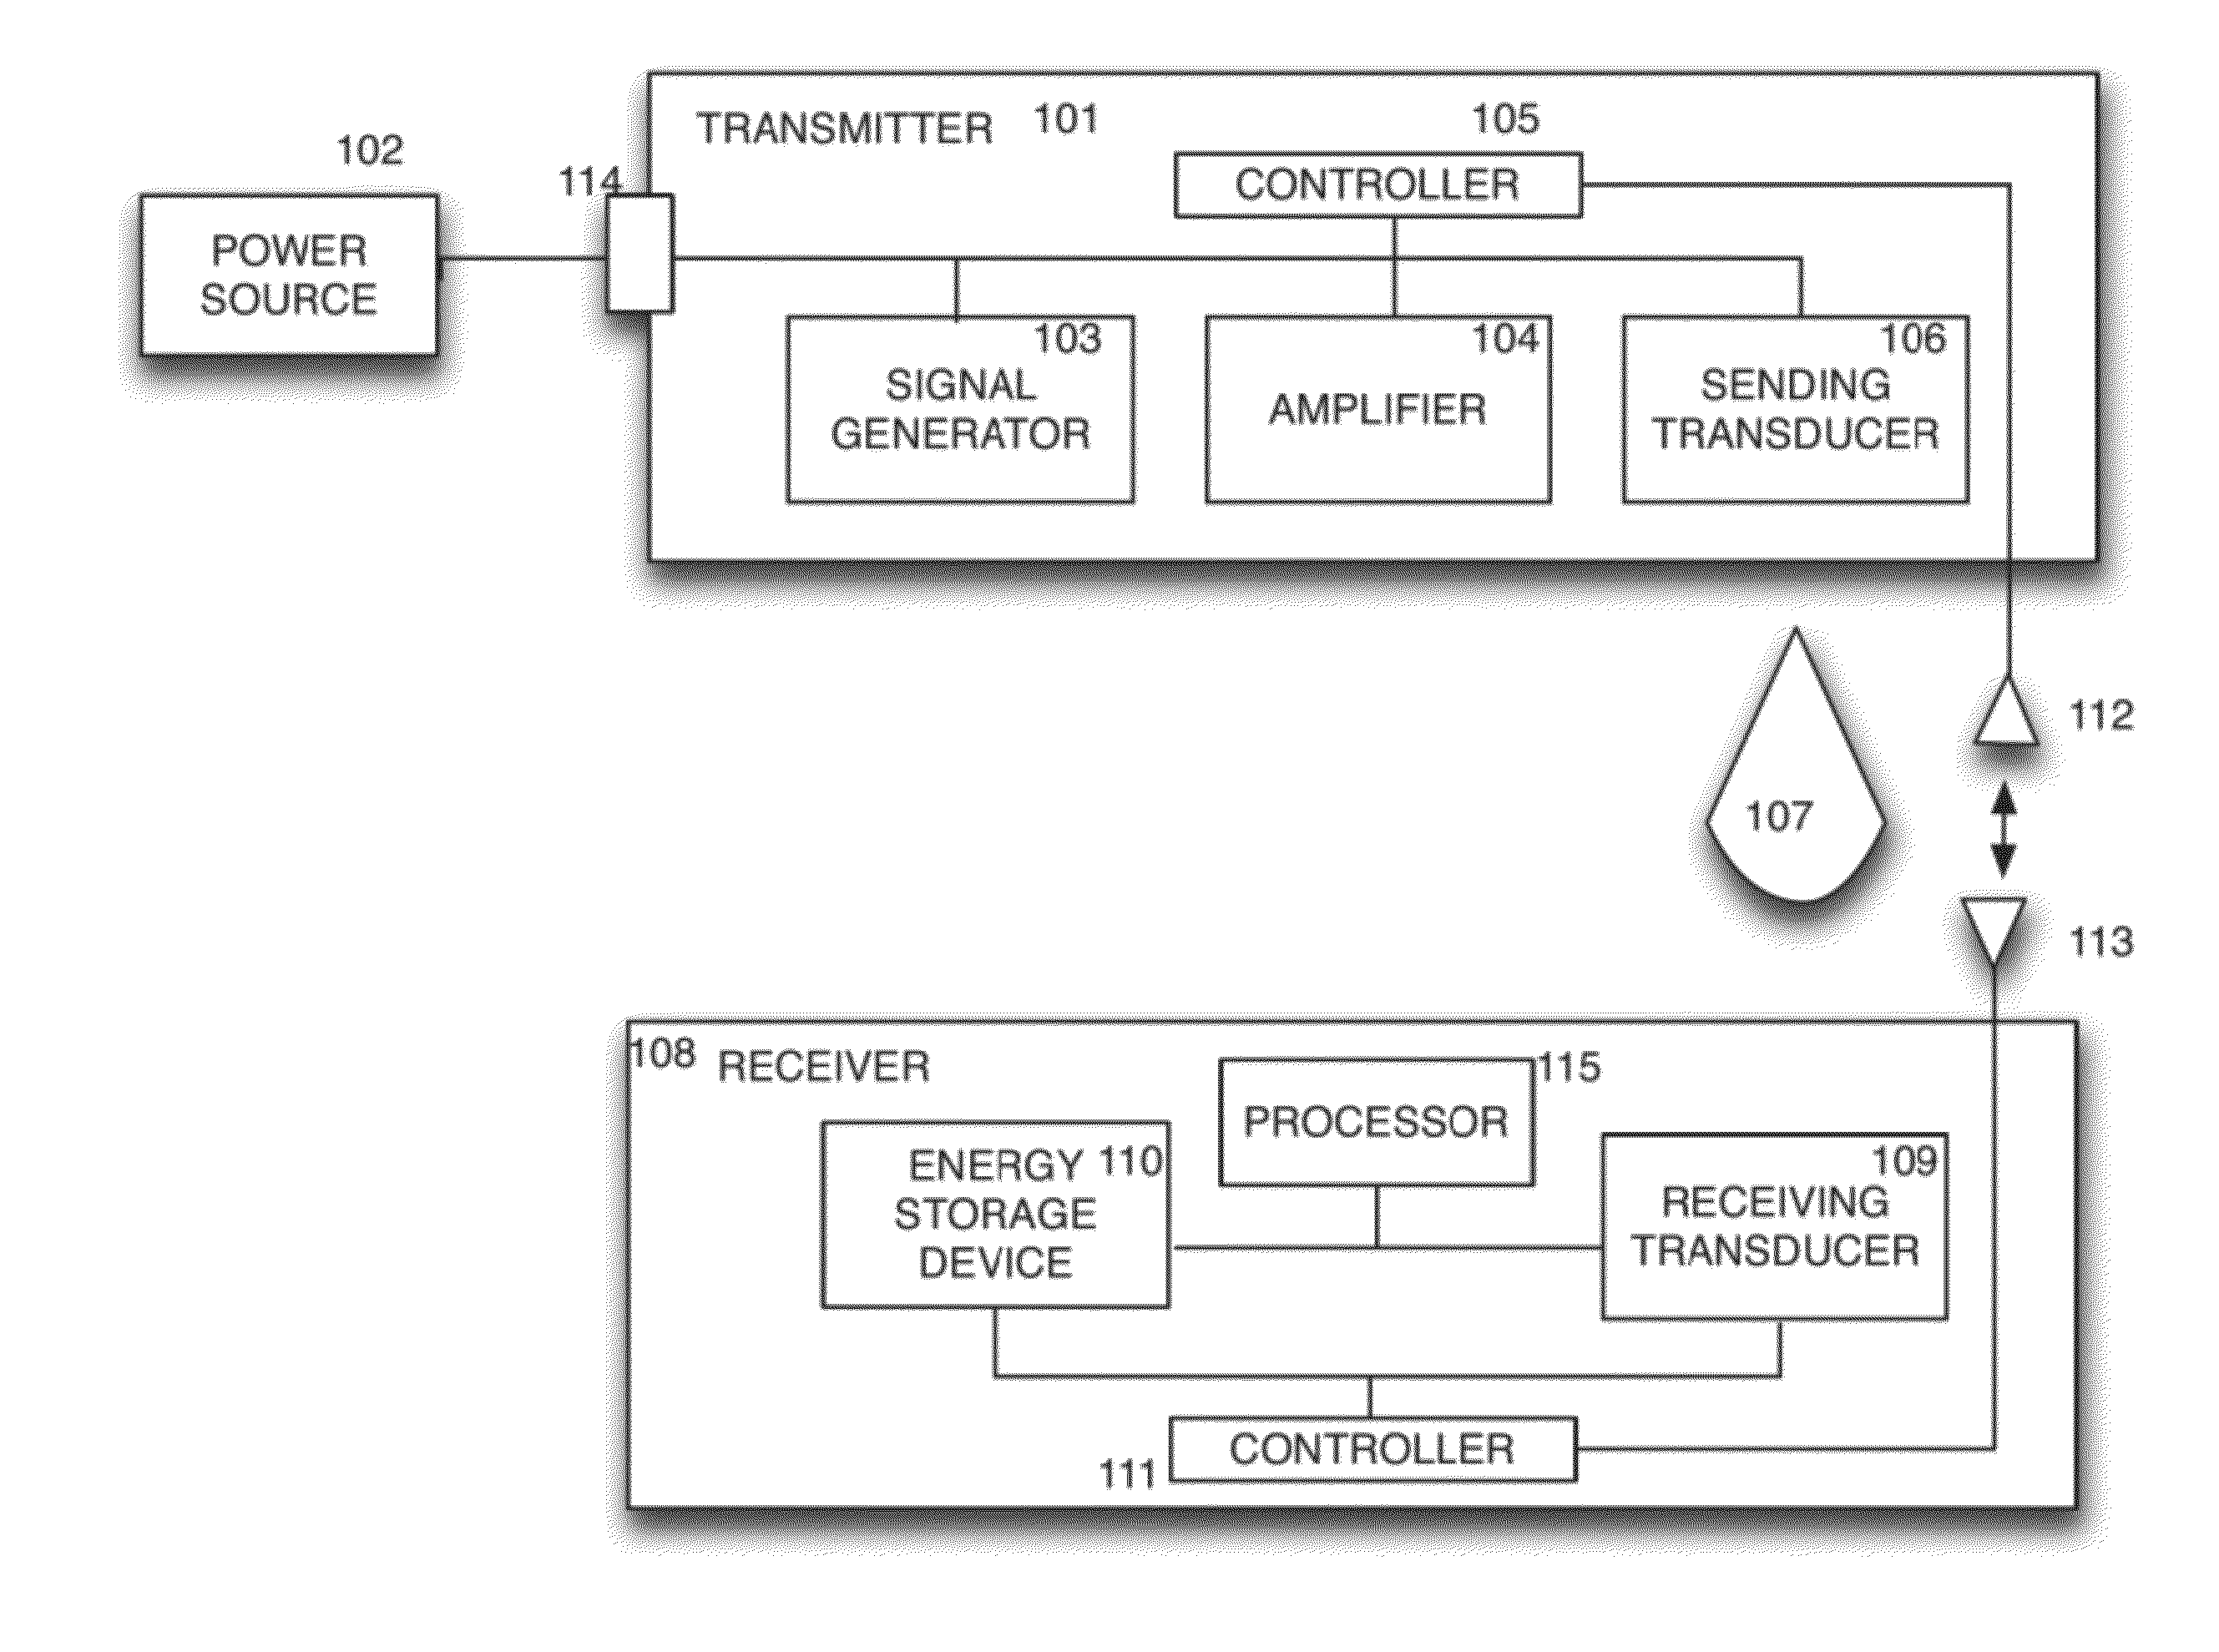 Receiver communications for wireless power transfer